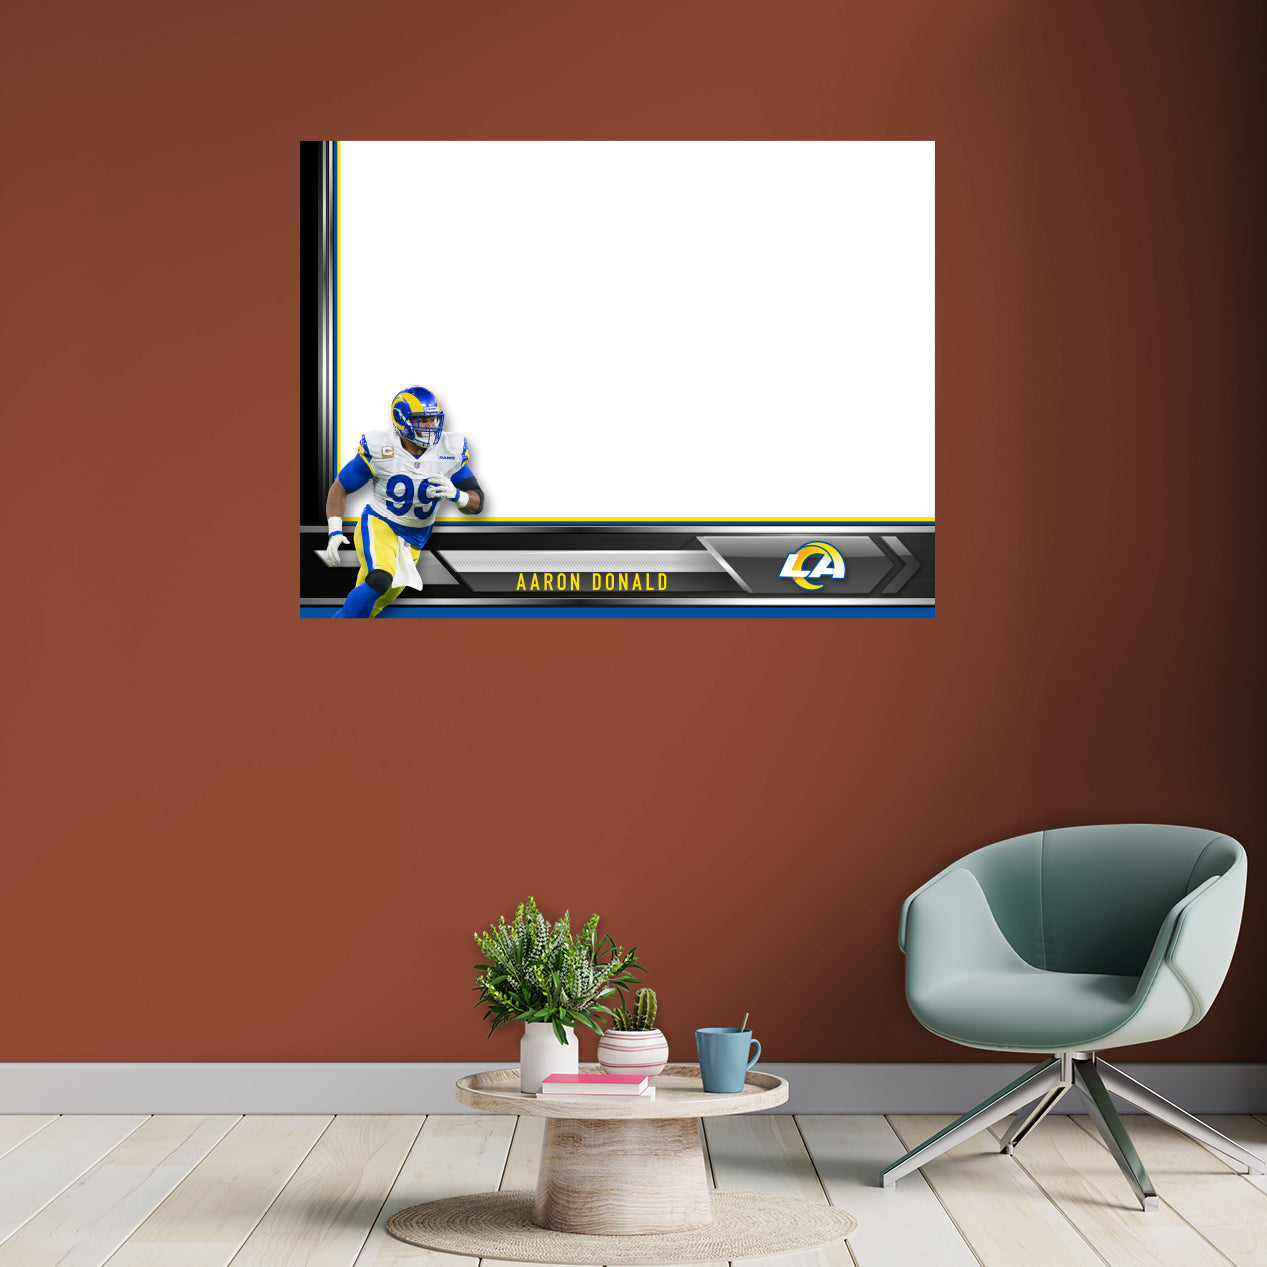 Los Angeles Rams: Aaron Donald Dry Erase Whiteboard - Officially Licensed NFL Removable Adhesive Decal